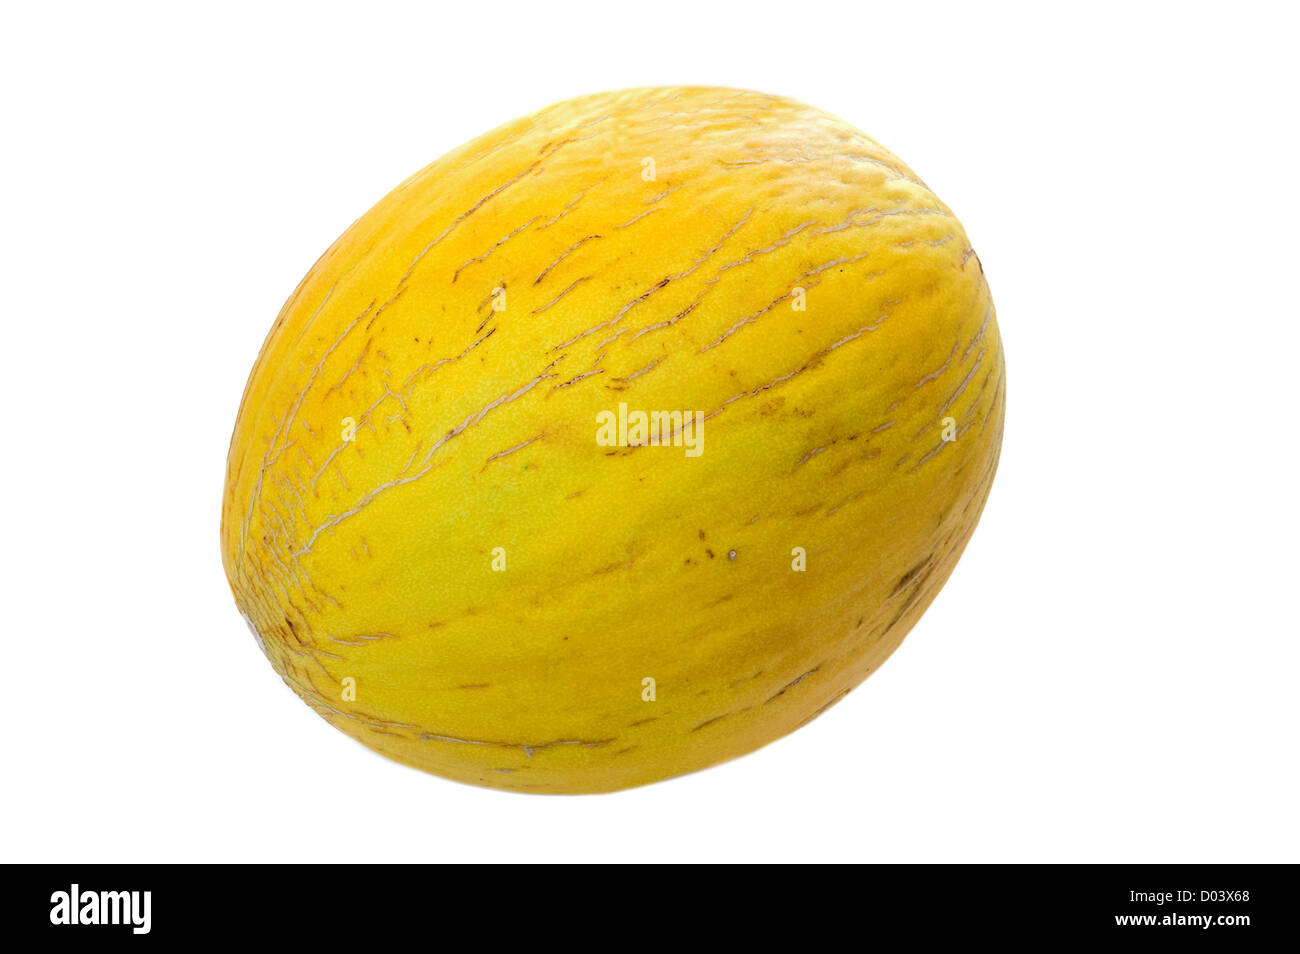 Yellow melon isolated over white background Stock Photo